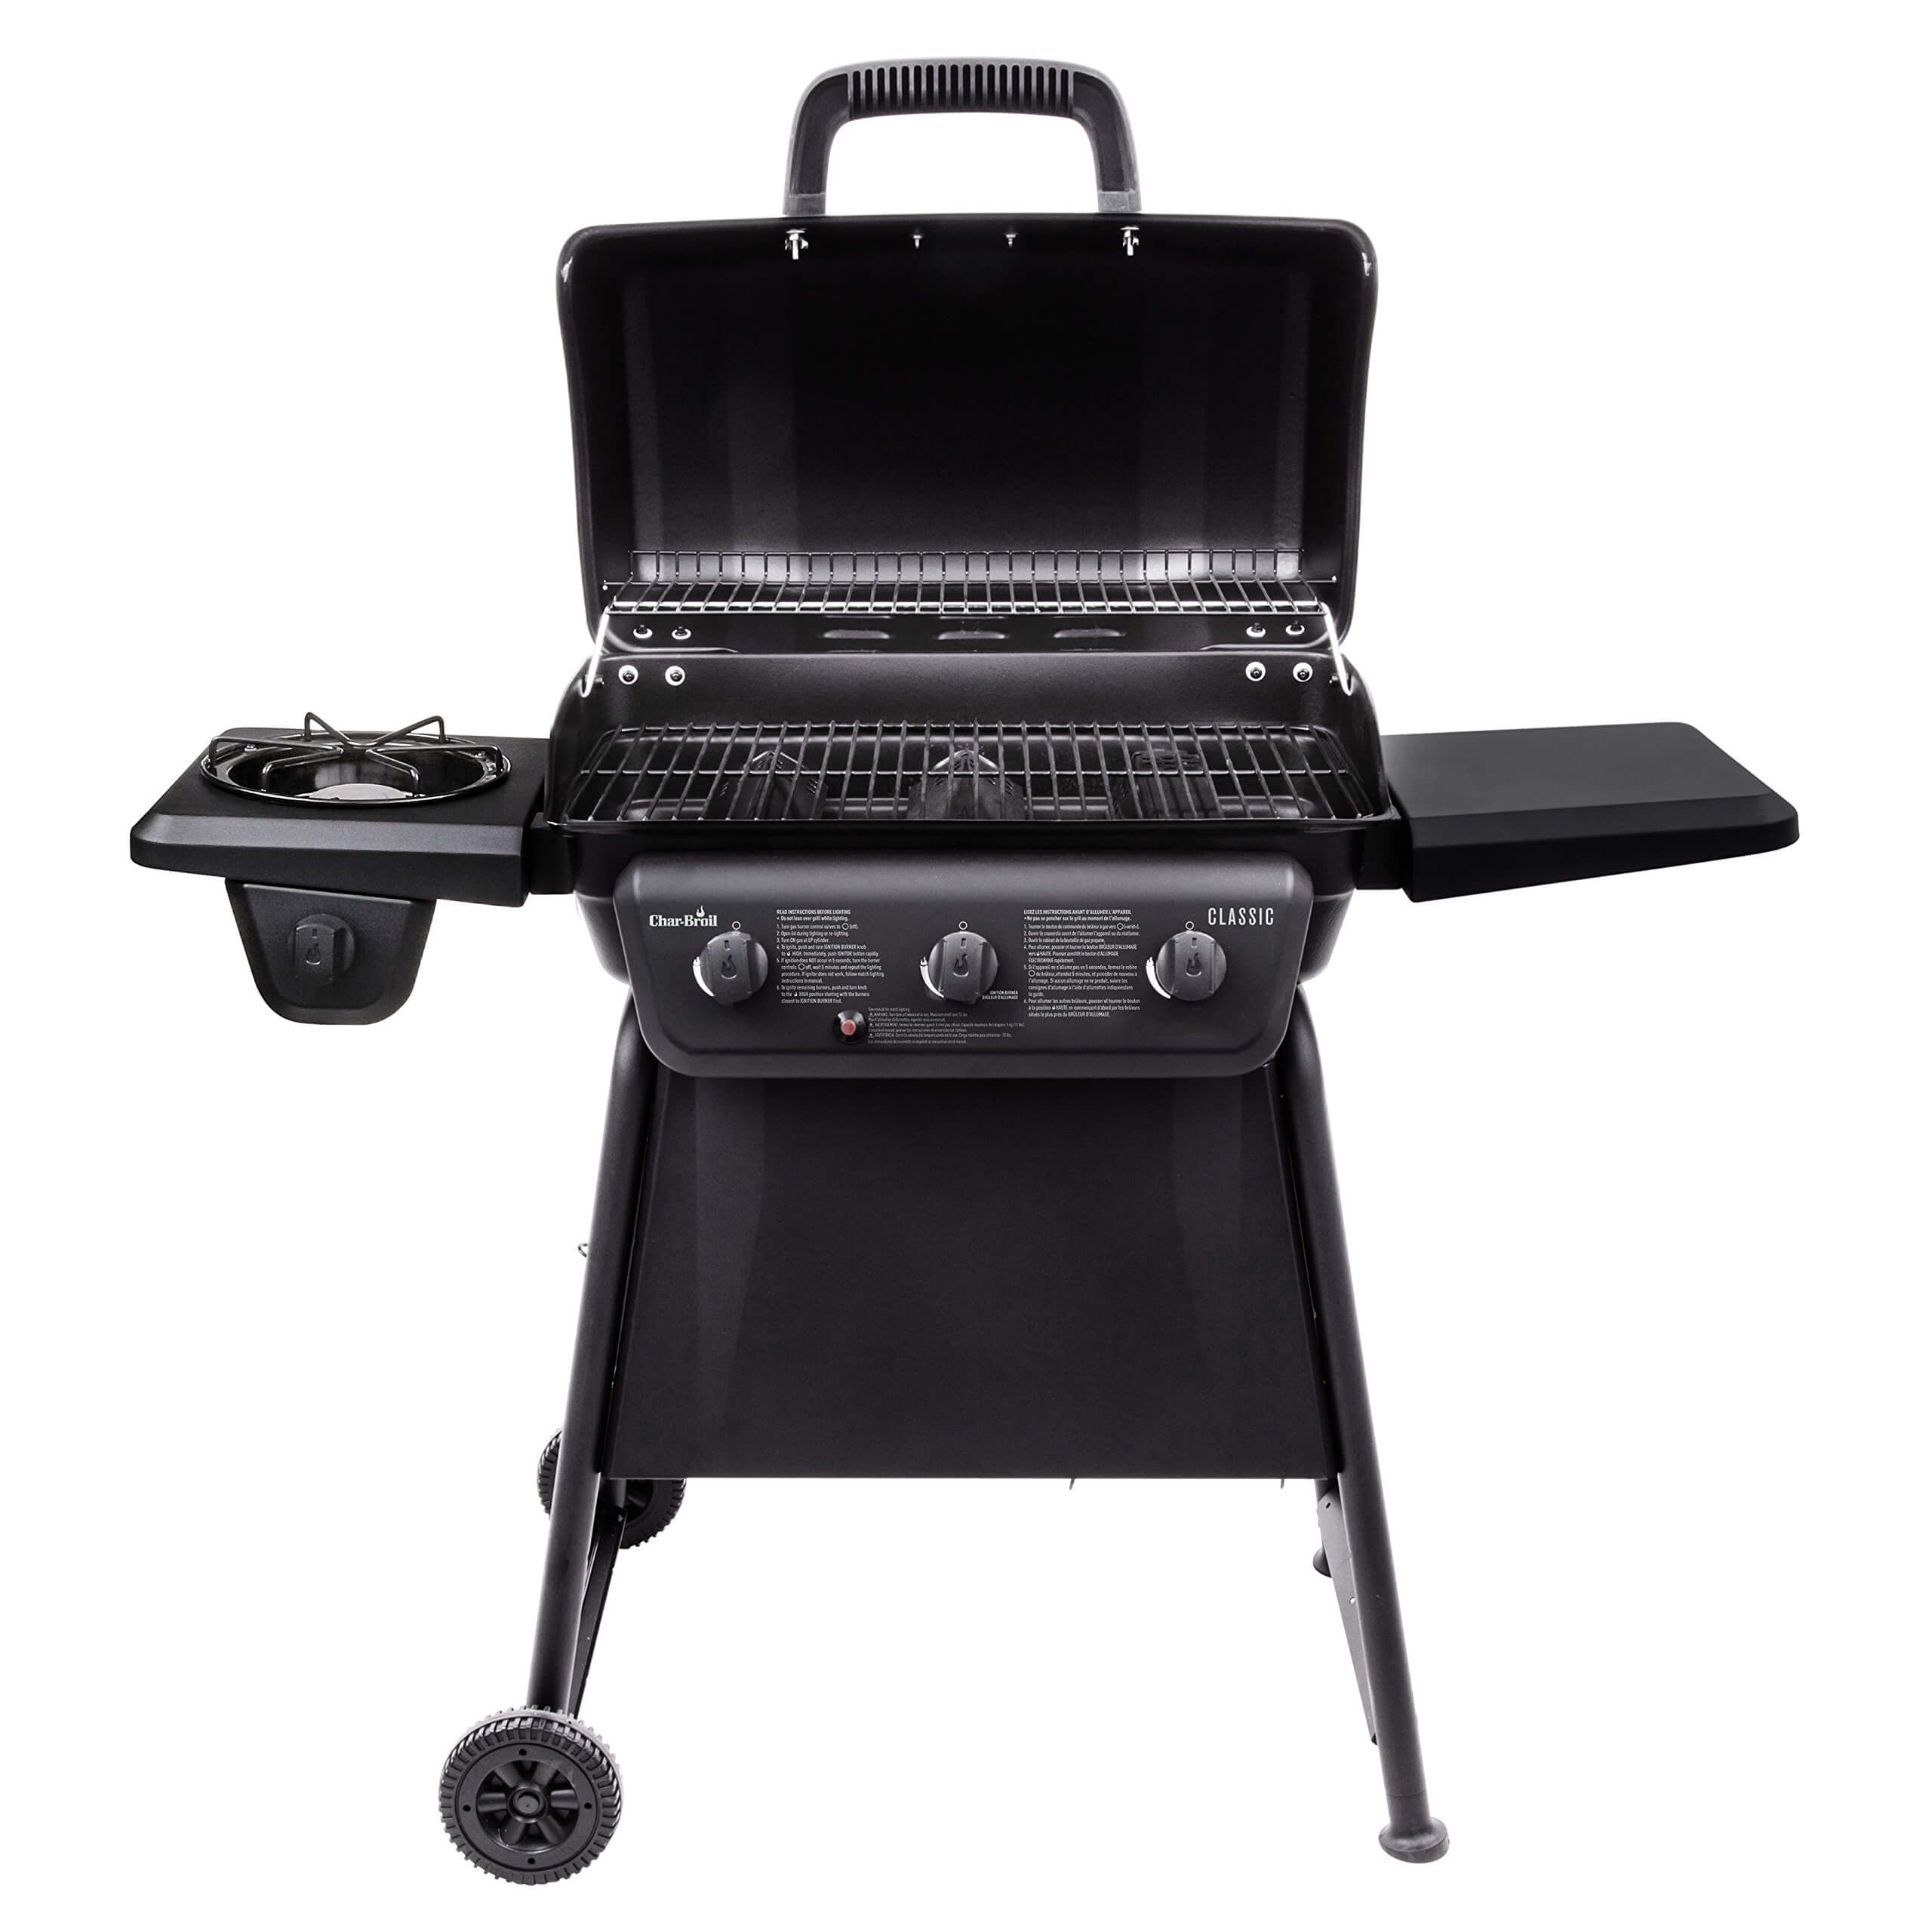 Best Gas Grill under $300 for Delicious and Easy Home Grilling. char-broil performance 475, char-broil performance 475 gas grill, best charcoal grill under 300, best charcoal grills under 300, best propane smoker under 300, best propane gas grills under $300